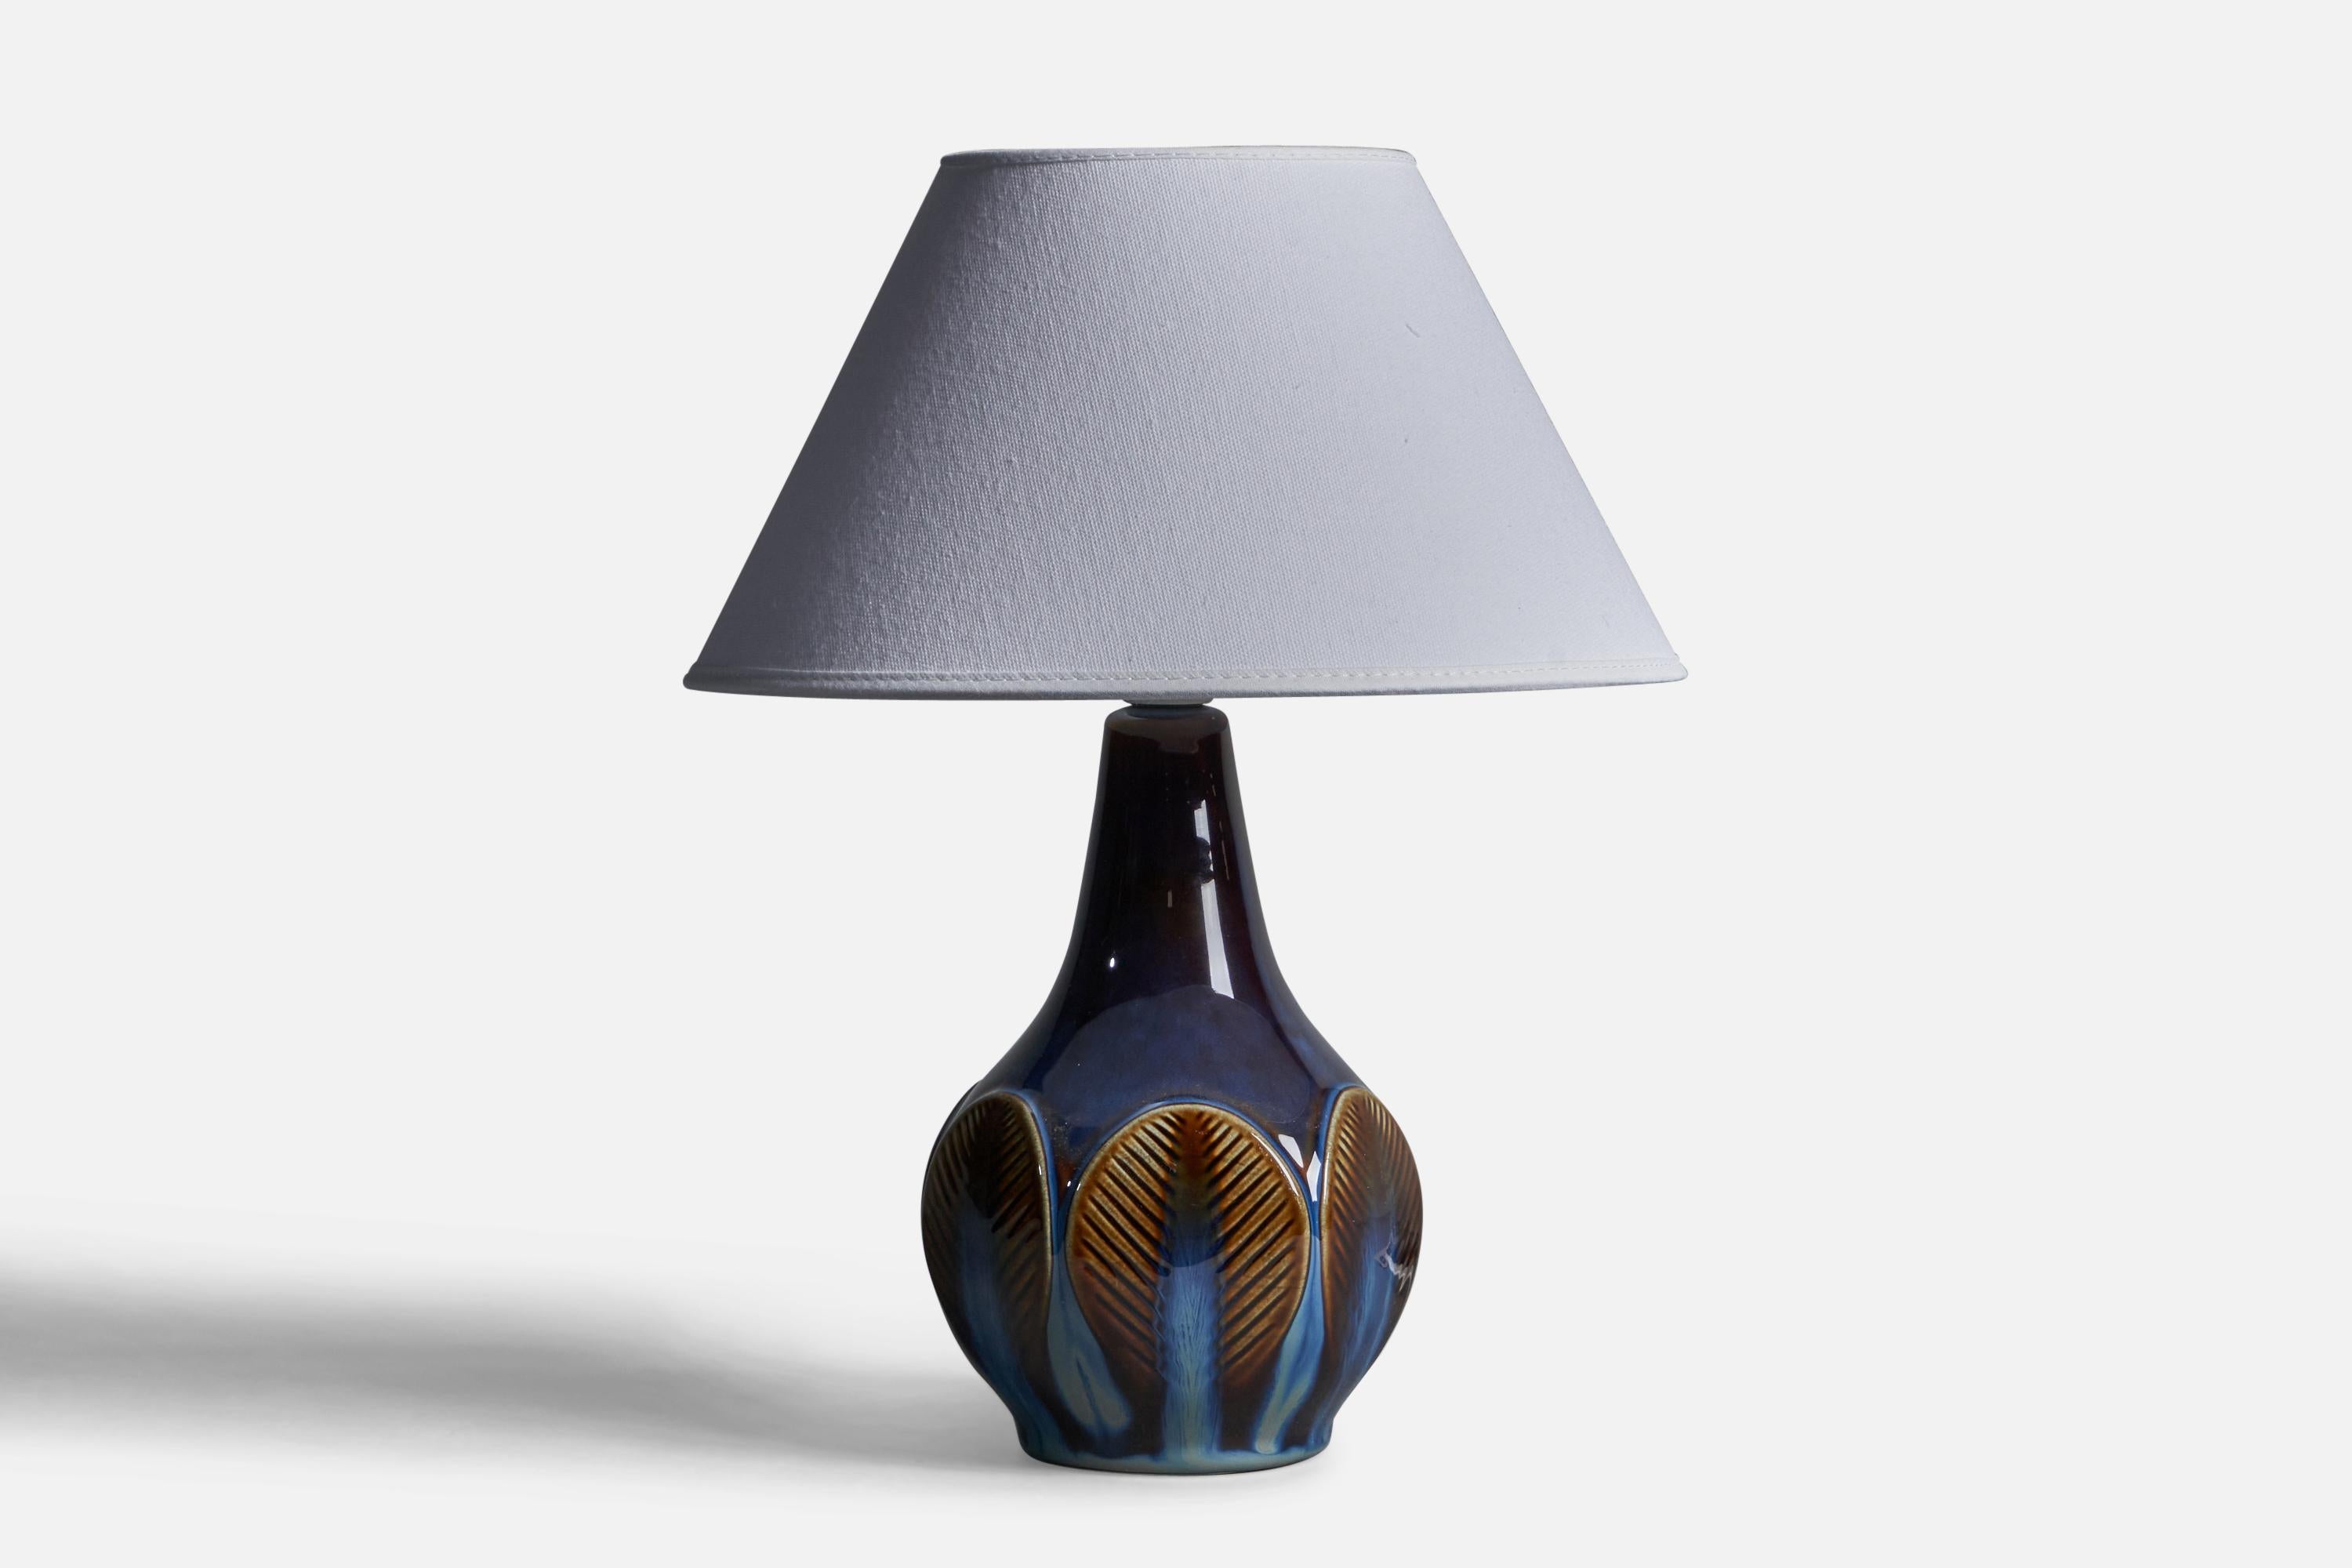 A blue-glazed stoneware table lamp designed and produced by 
Søholm, Bornholm, Denmark, 1960s.

Dimensions of Lamp (inches): 10